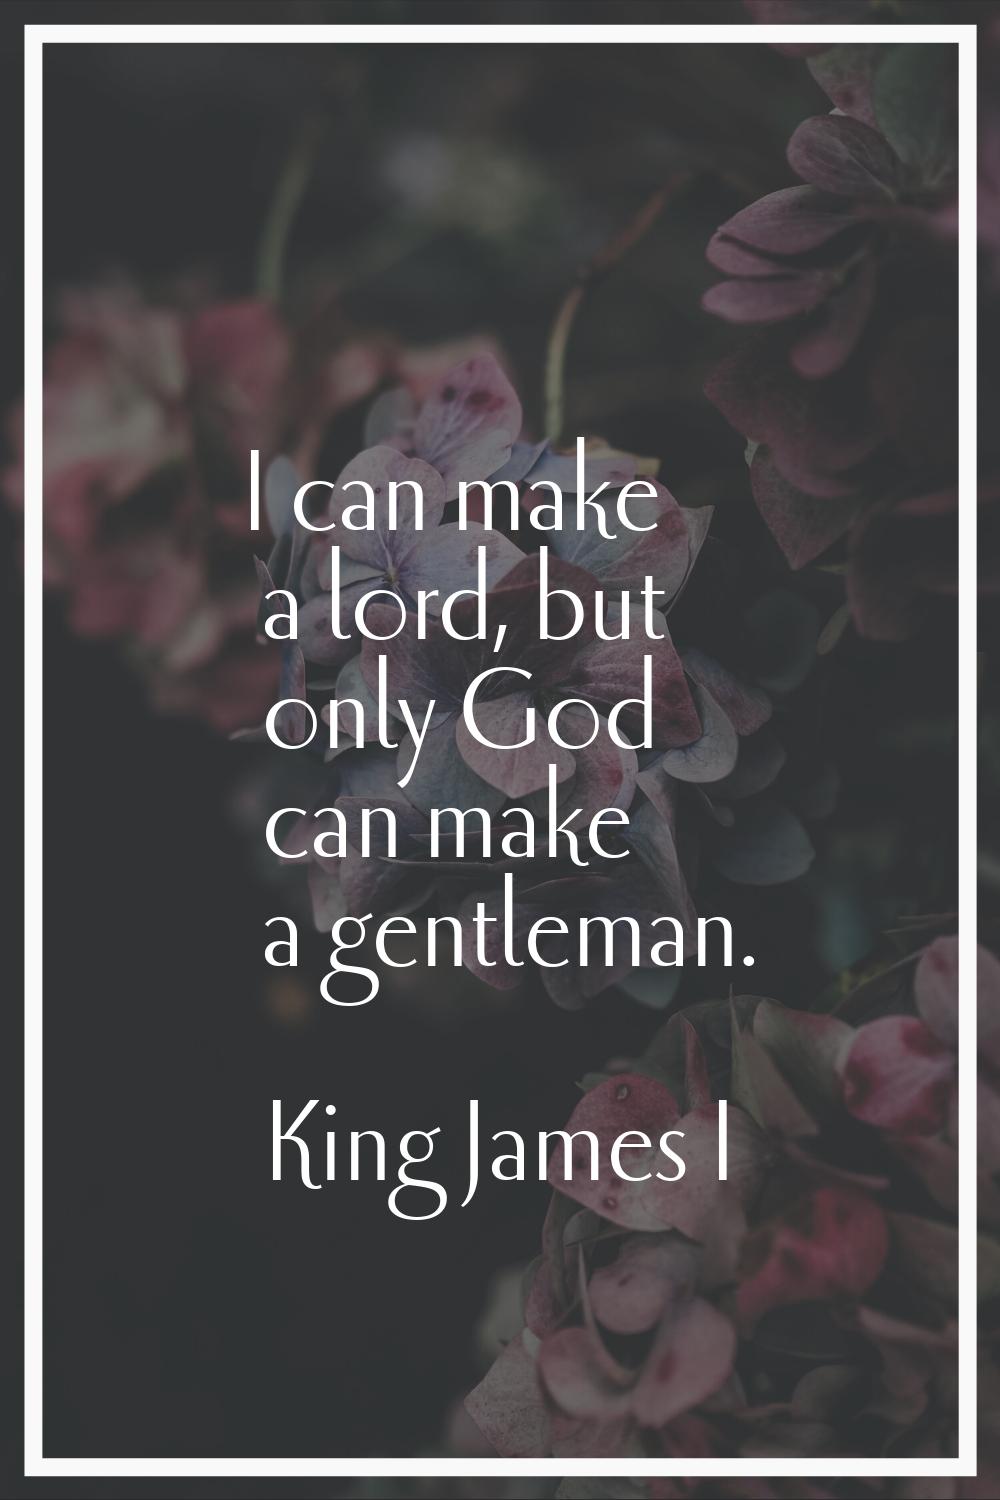 I can make a lord, but only God can make a gentleman.